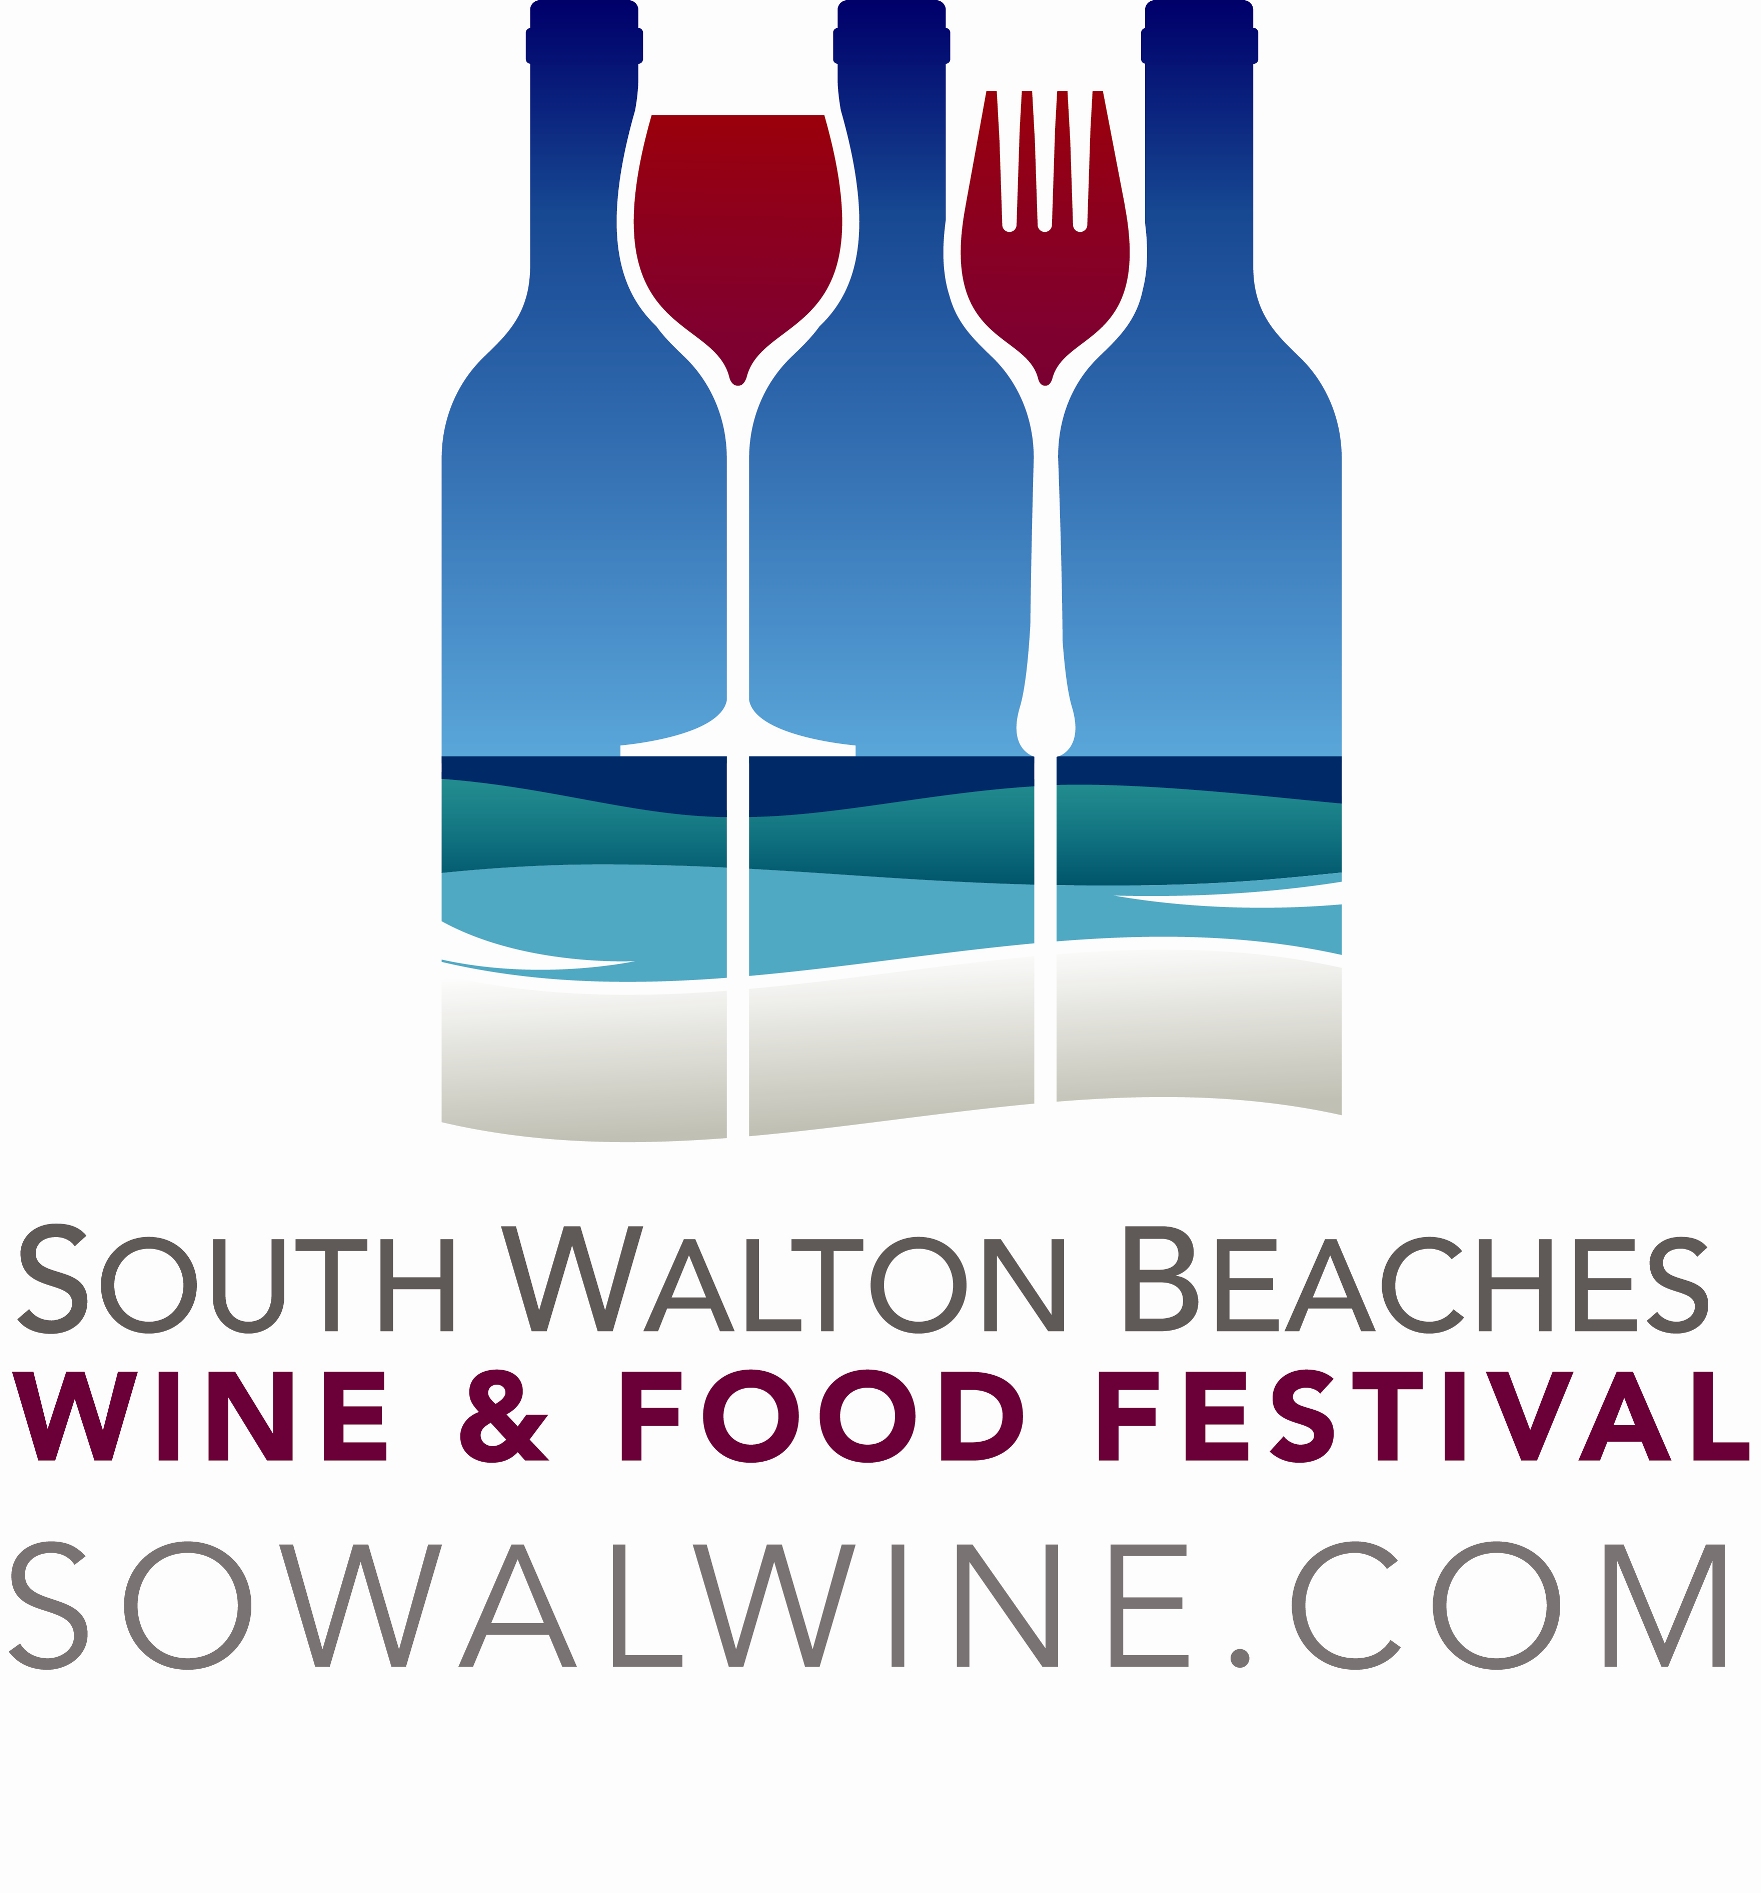 Discount tickets are on sale now, for a limited time, for the 2015 South Walton Beaches Wine and Food Festival.